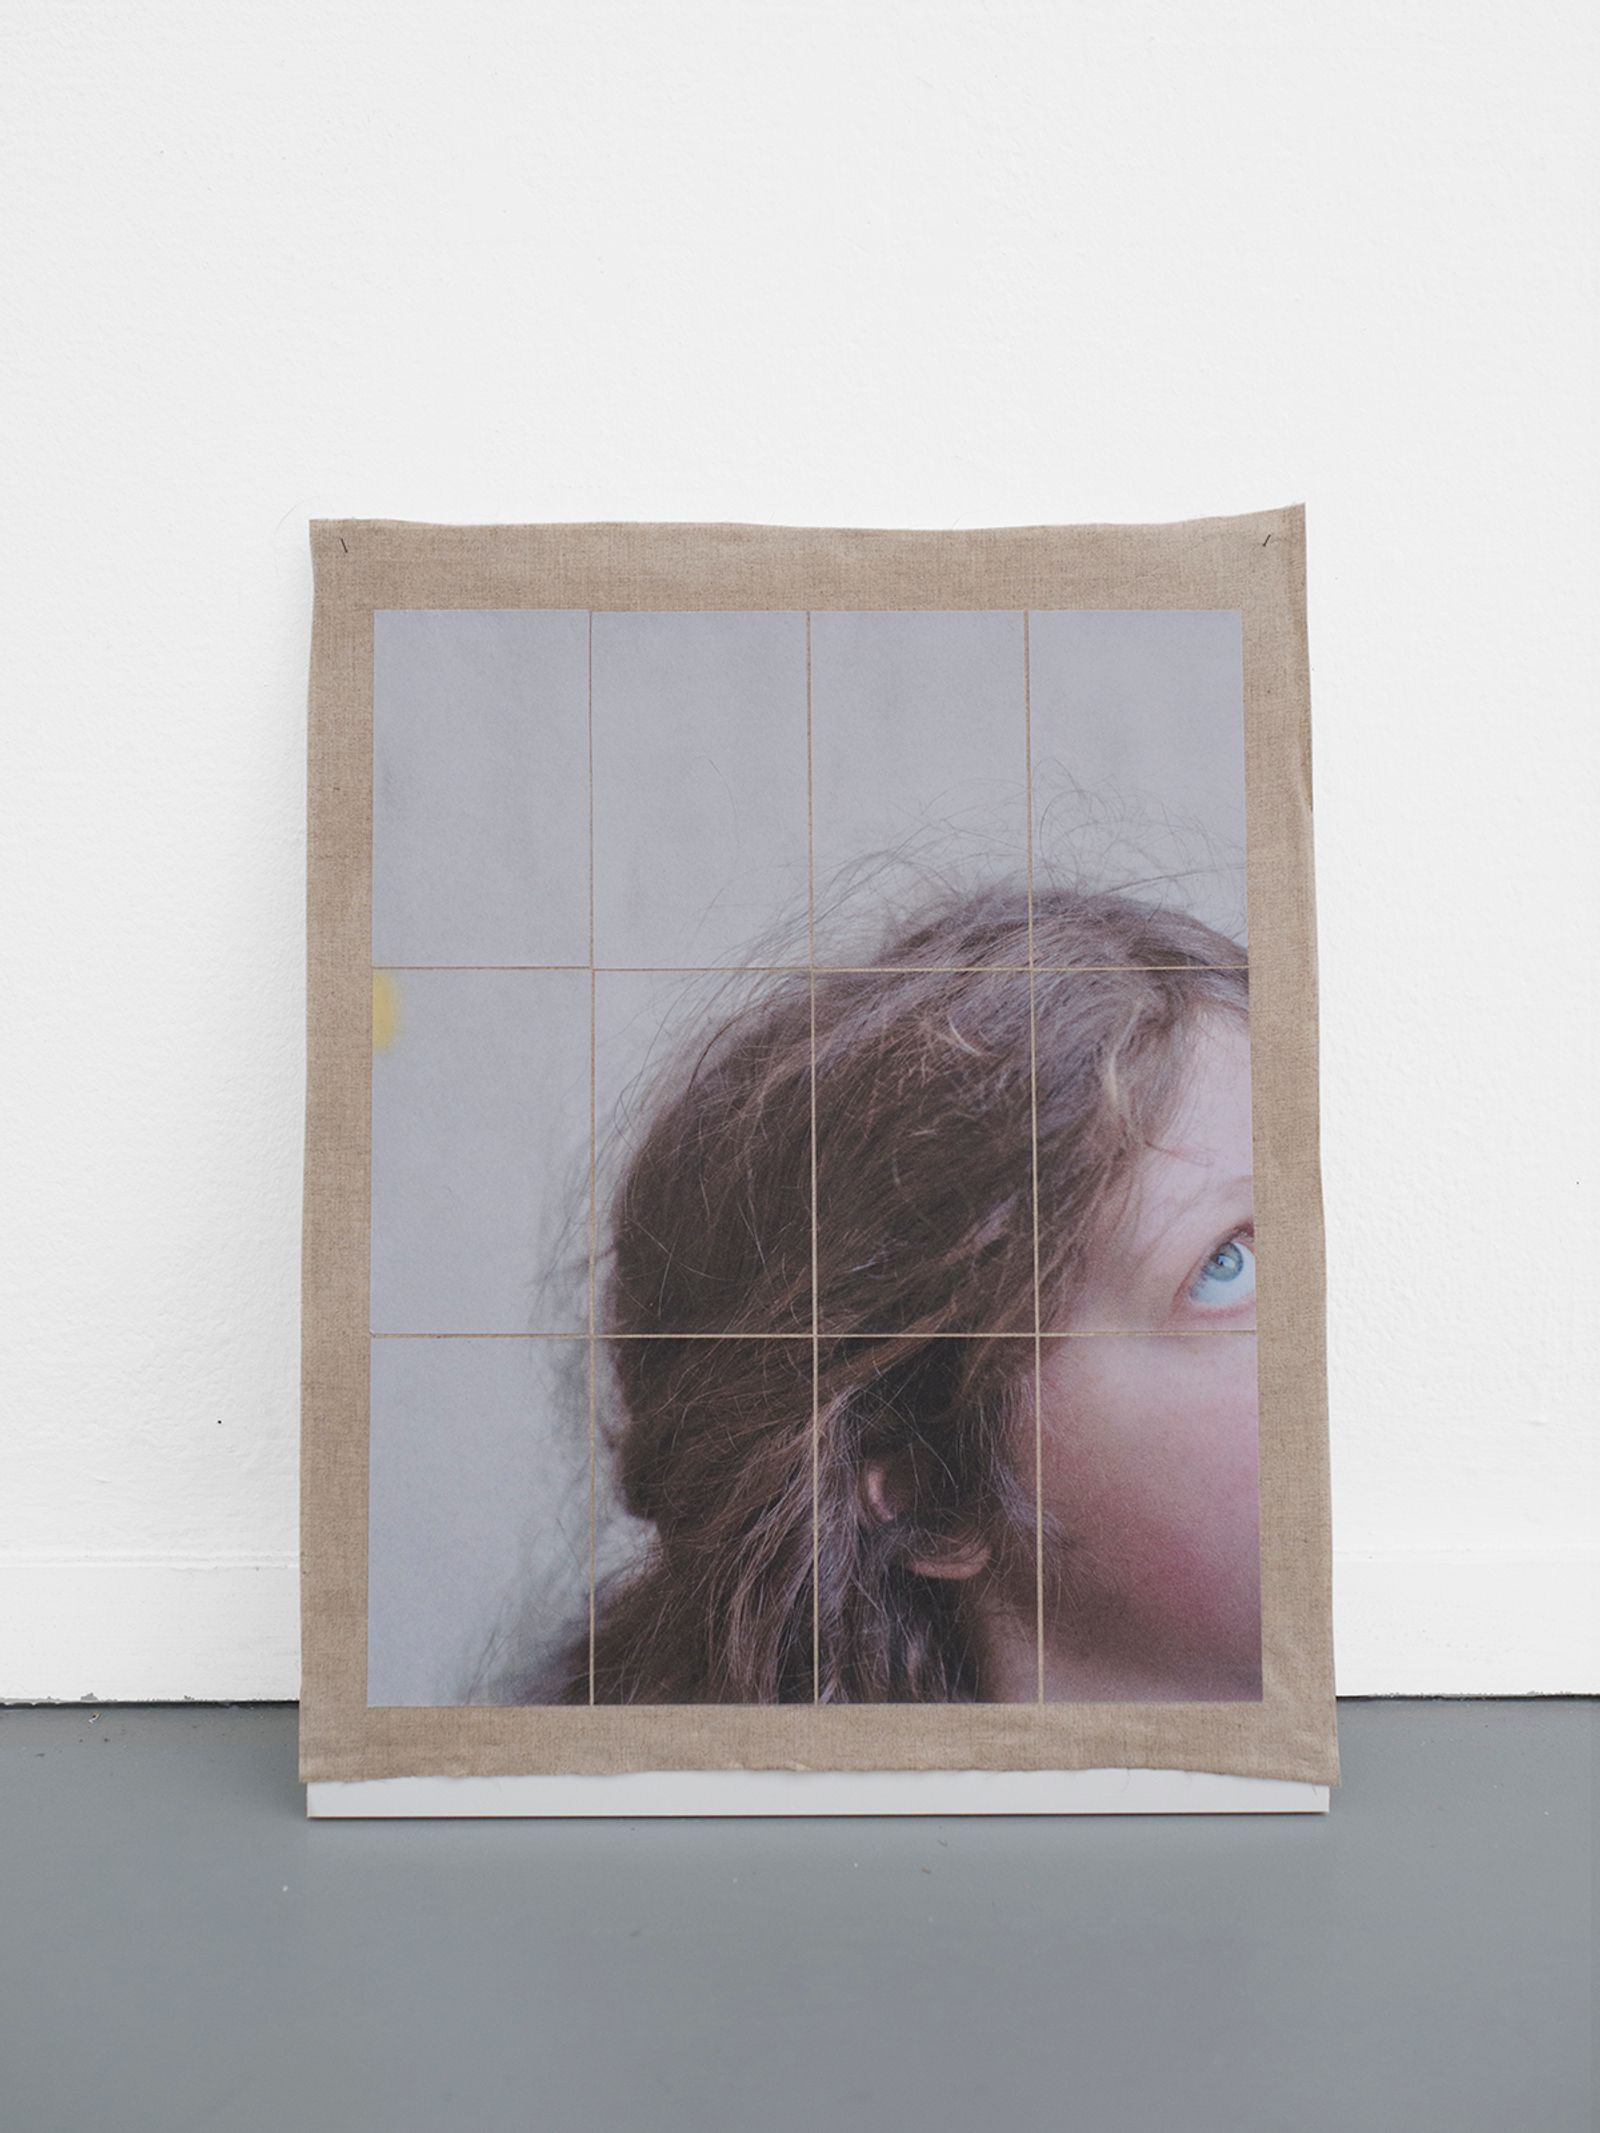 © Esther Hovers - Structures, Nele, 2019 58 x 46 cm / 22.8 x 18.1 in. Inkjet prints on Tosa Shi – 54 gsm, fixed on linen.